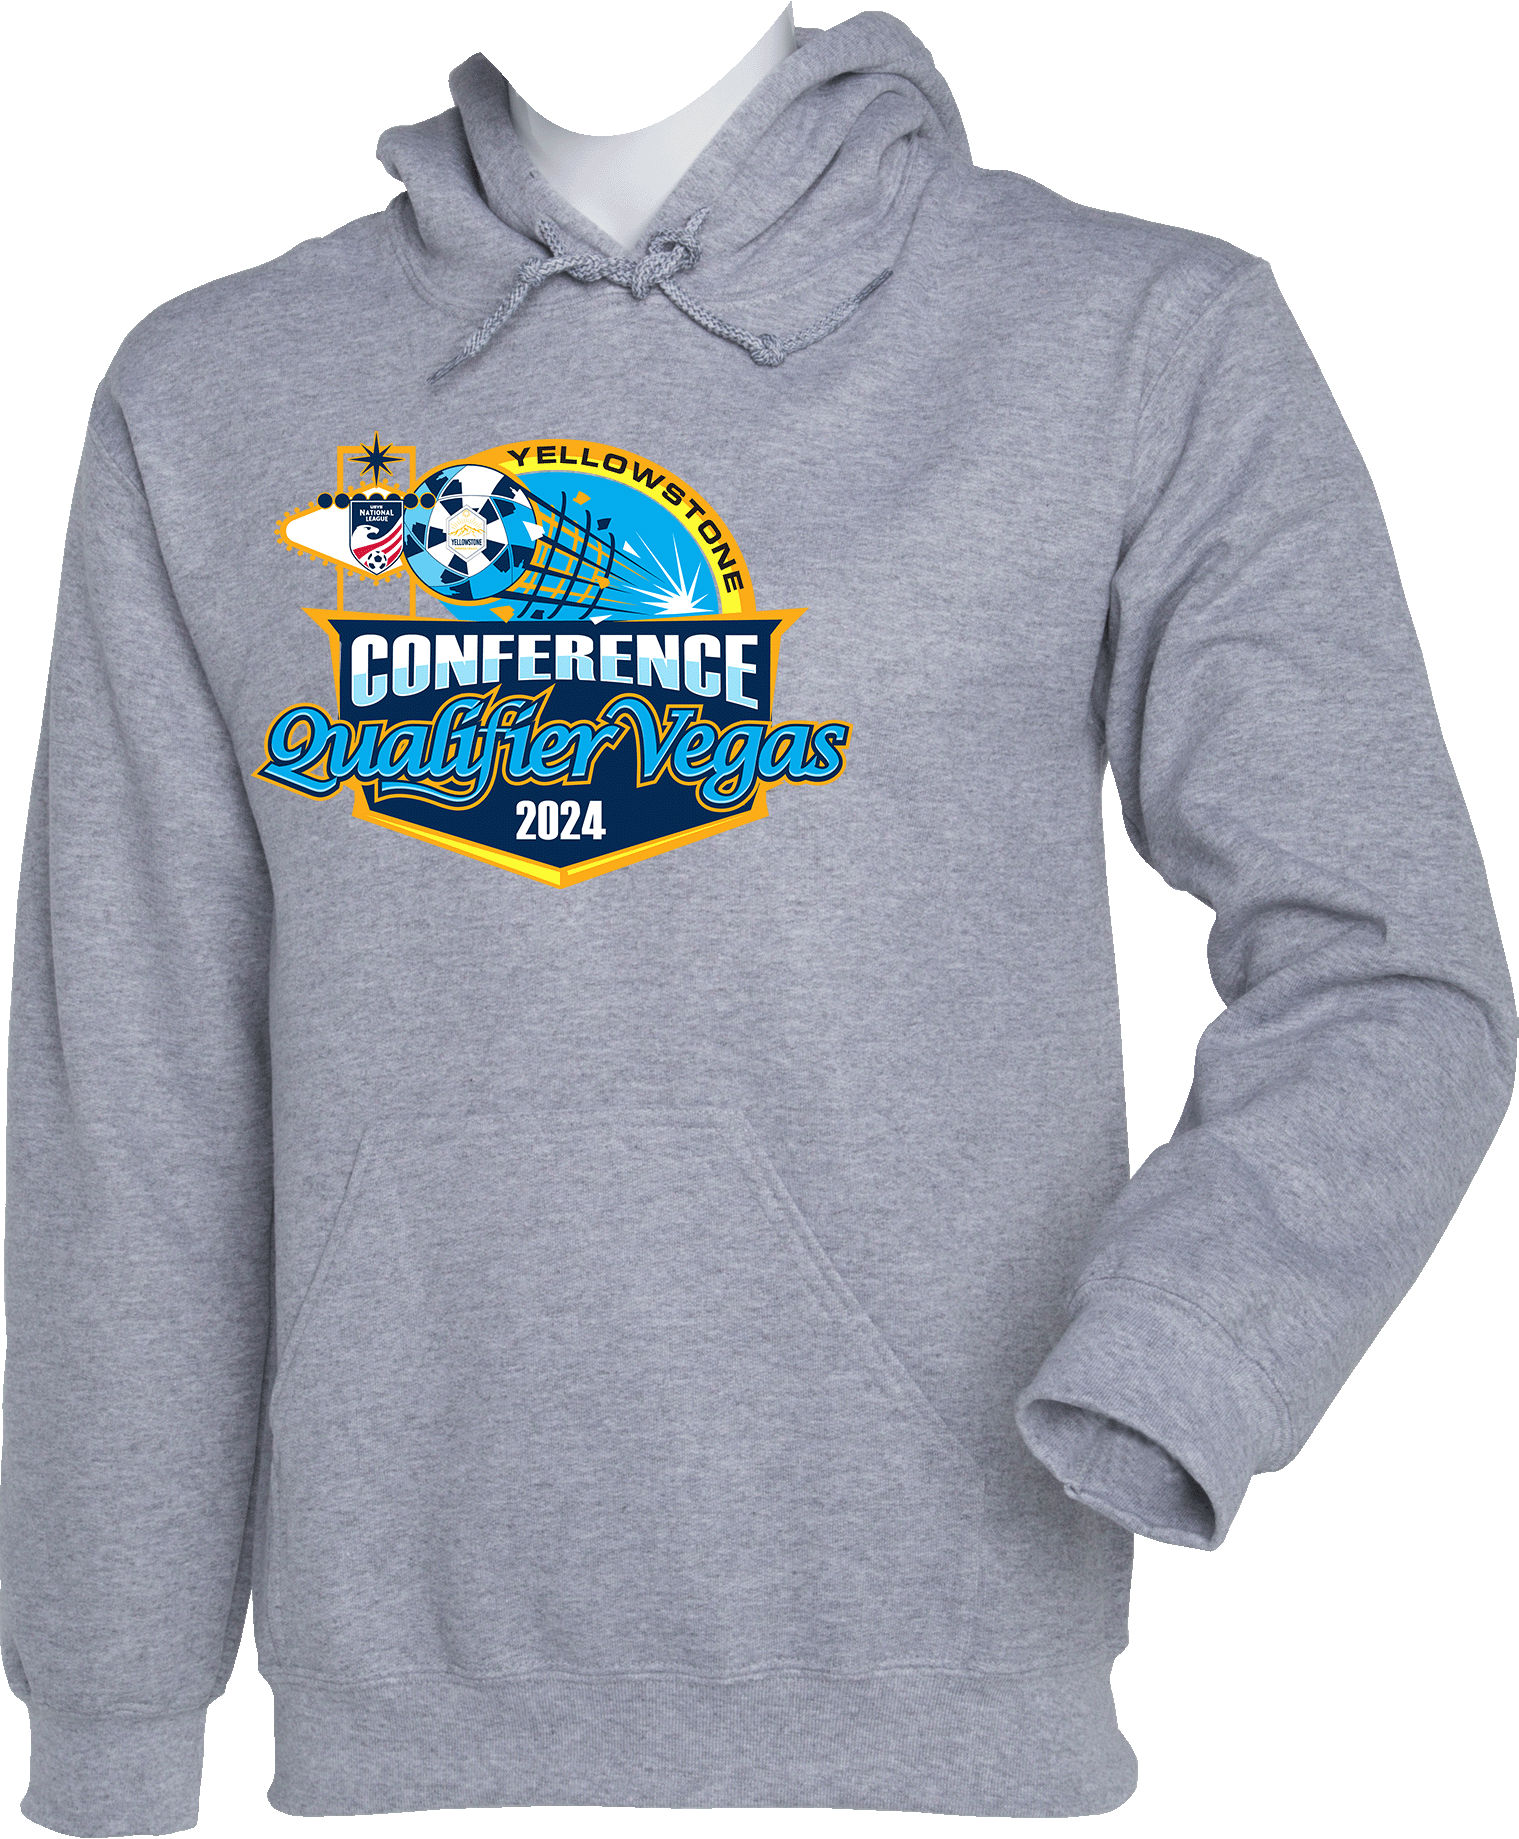 Hoodies - 2024 Yellowstone Conference Qualifier Vegas